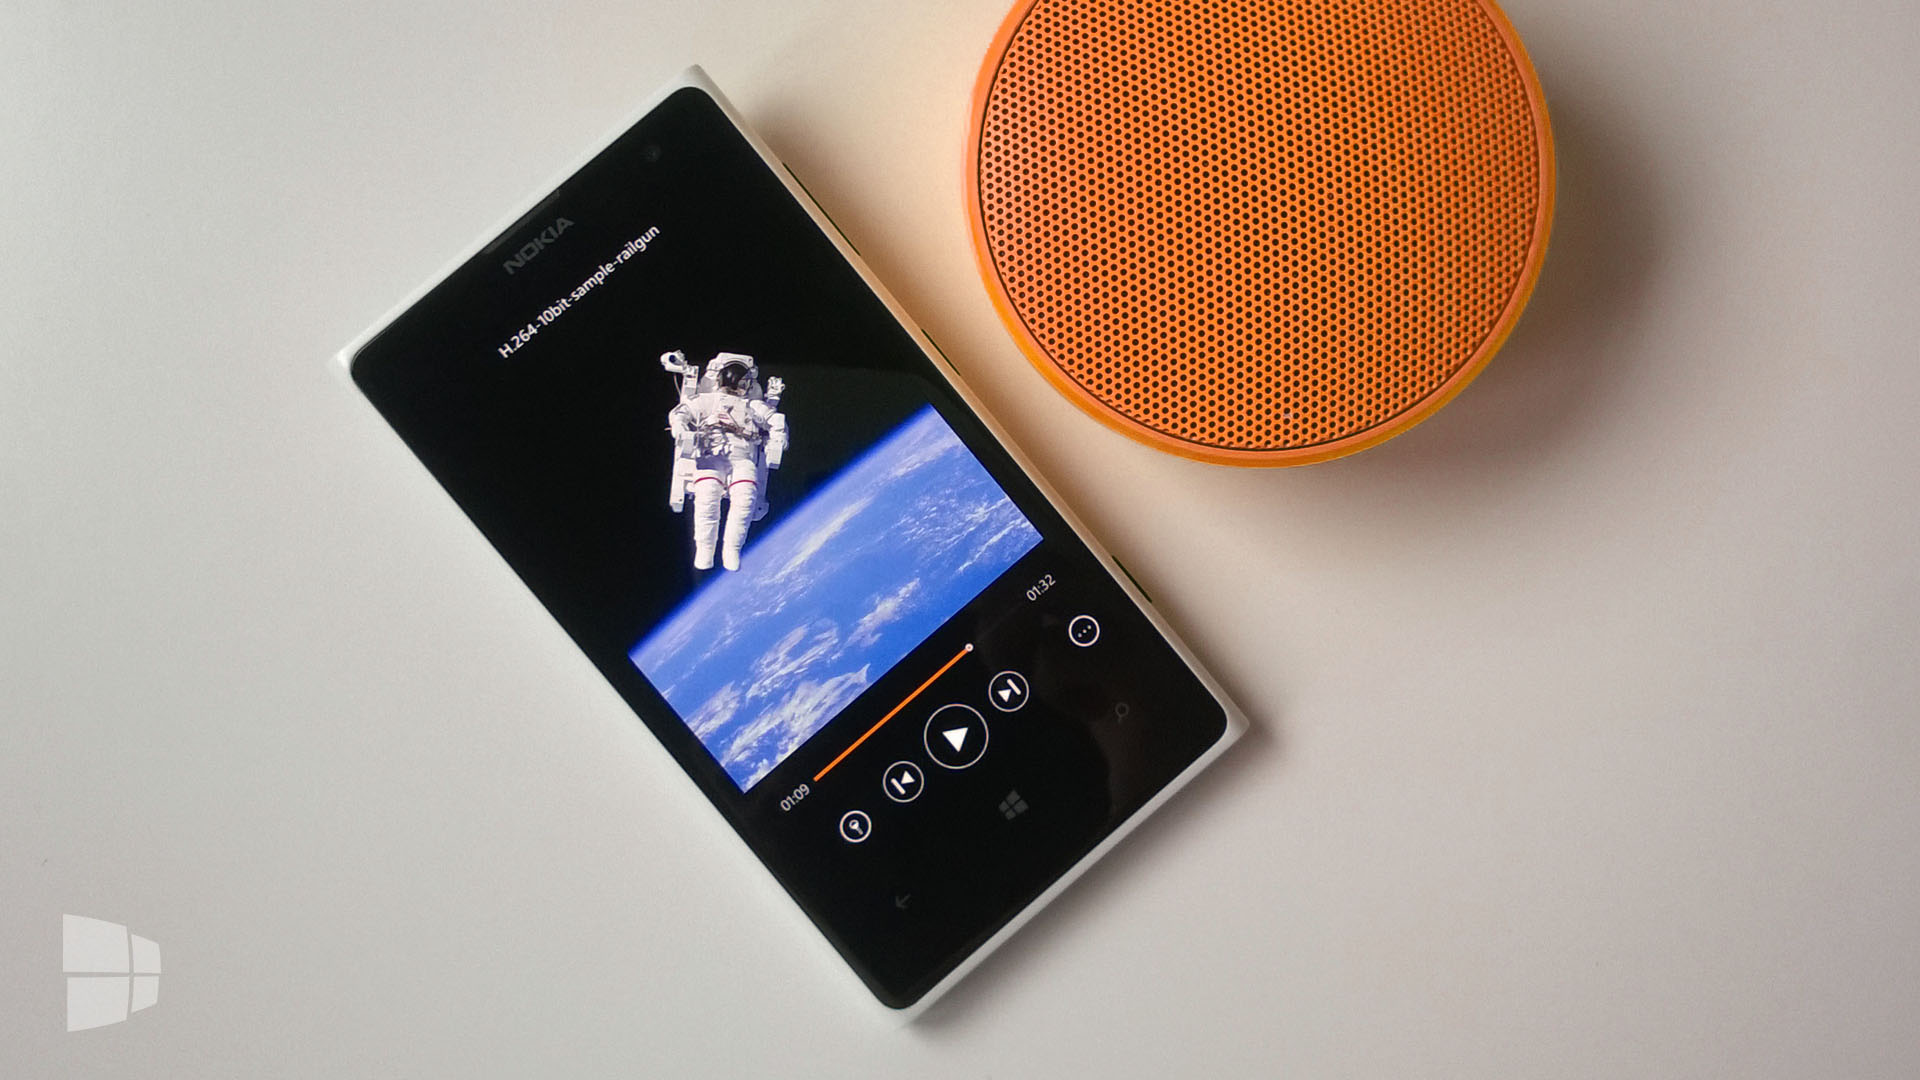 vlc download for windows phone